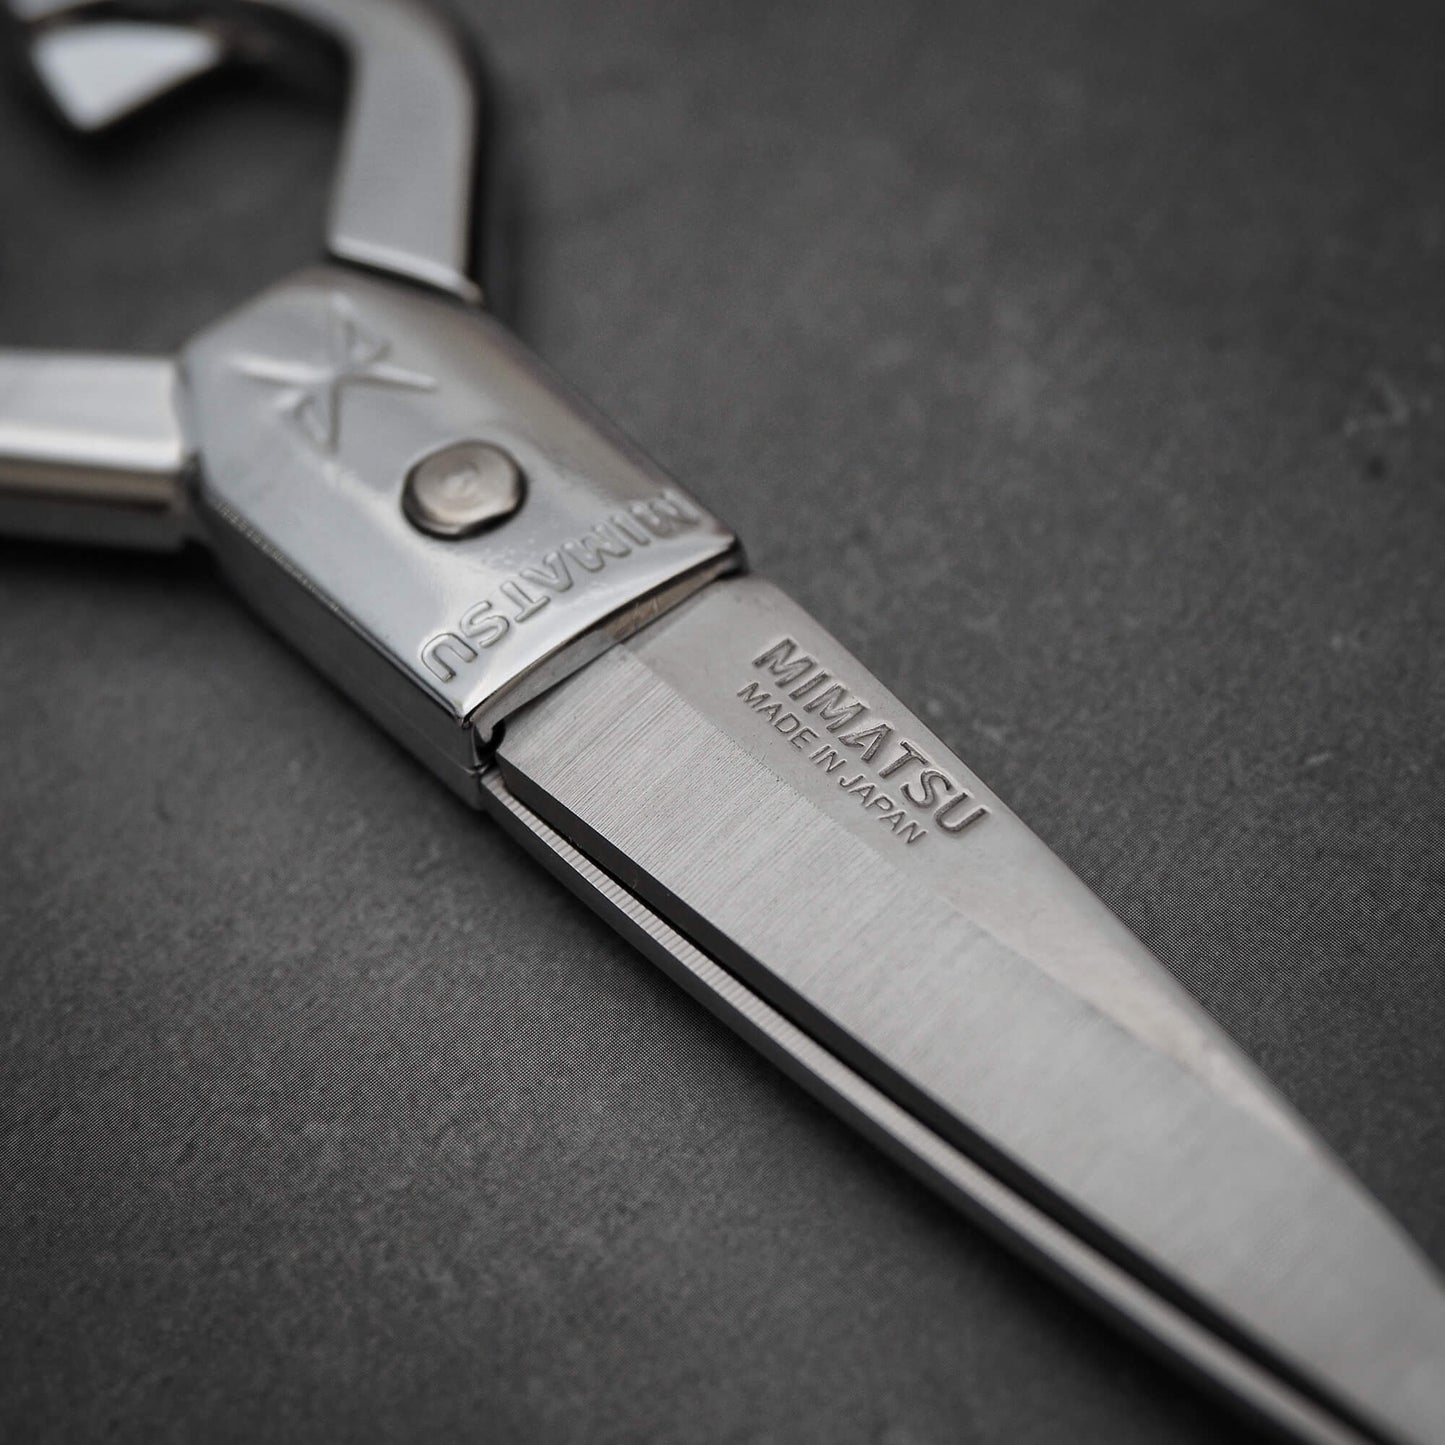 Close up view of the blade of Mimatsu 200mm kitchen shears: Japan-made all-stainless, durable shears for a variety of kitchen tasks. 